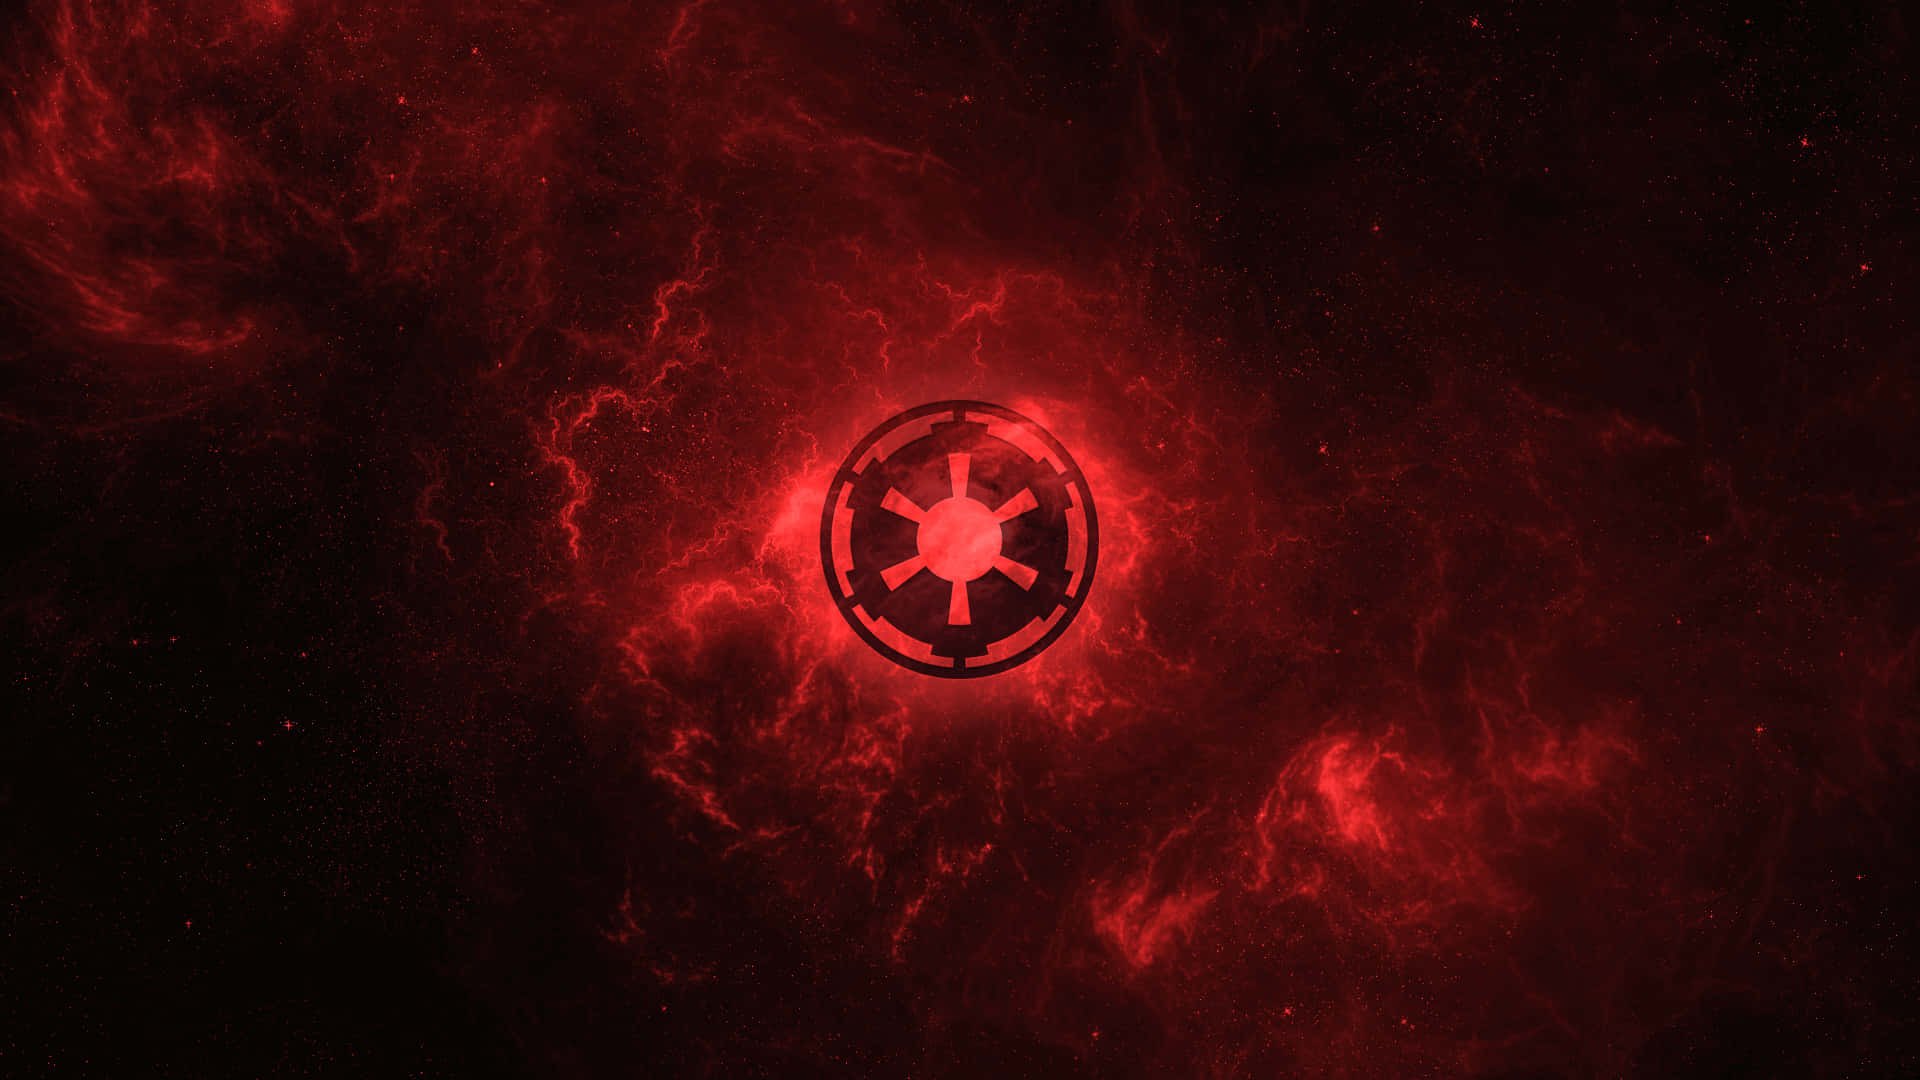 Imperial Logo of the Galactic Empire Wallpaper